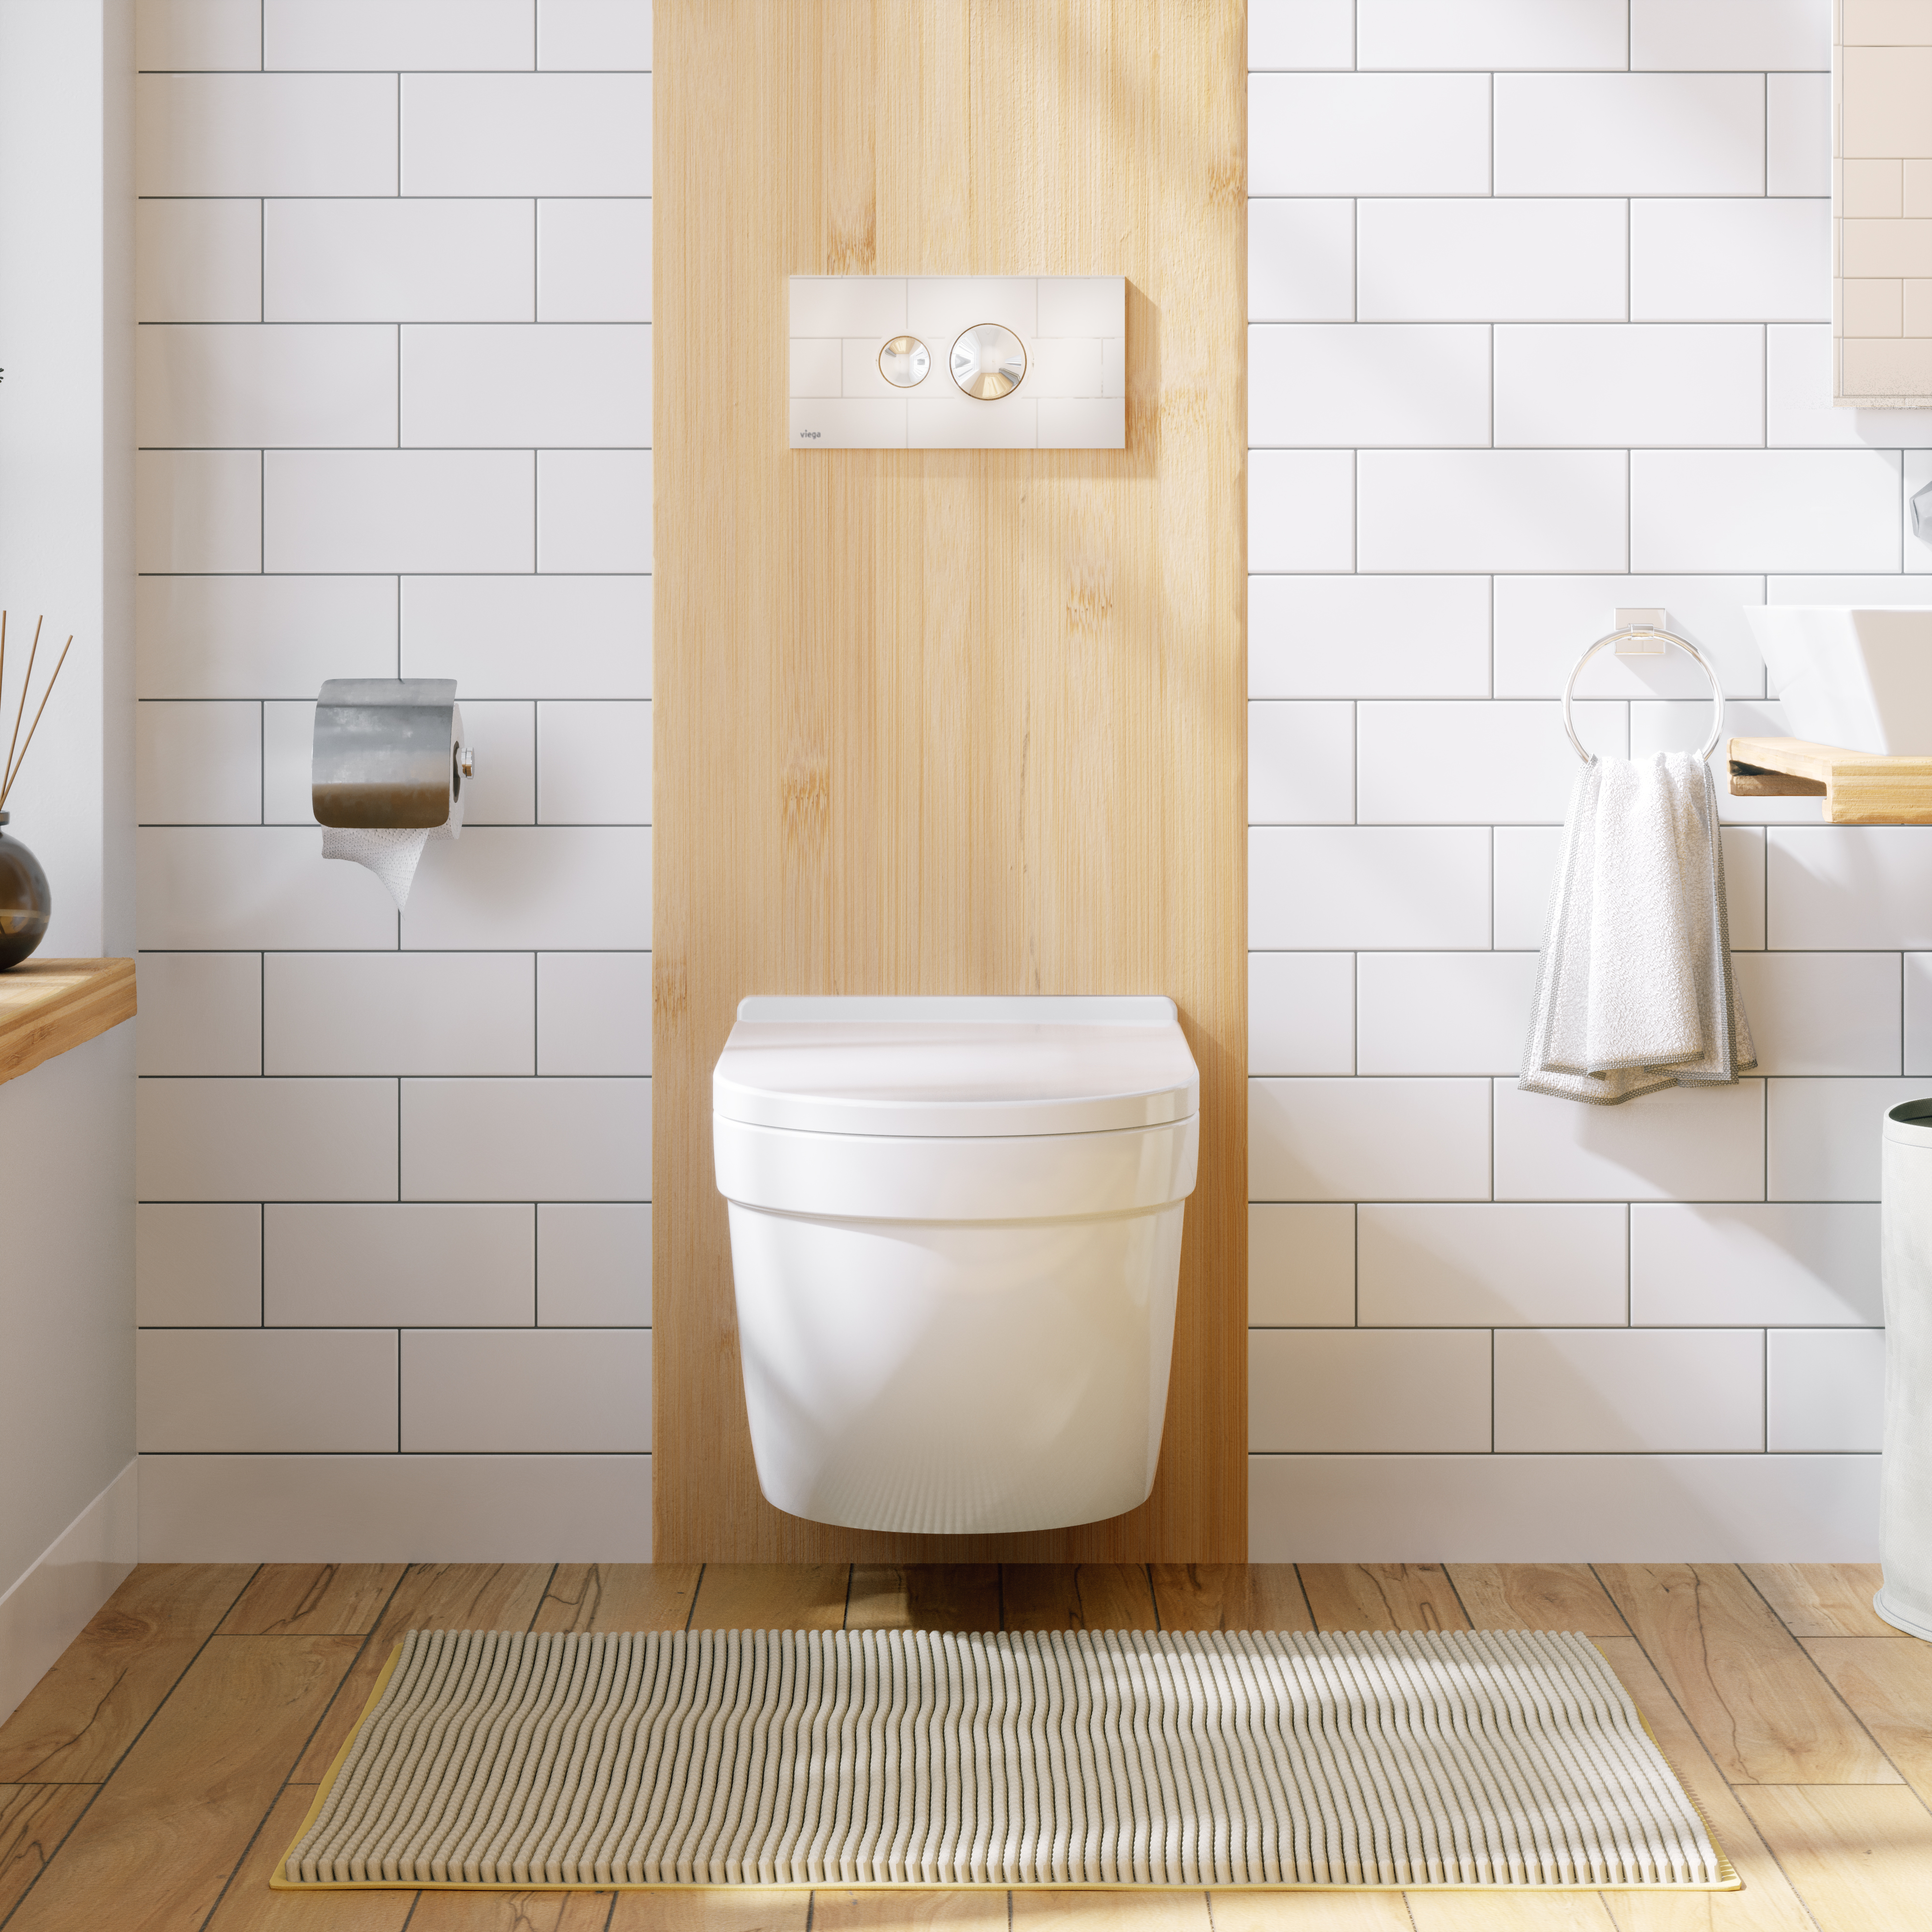 Wall-Mounted Toilets: What You Need to Know